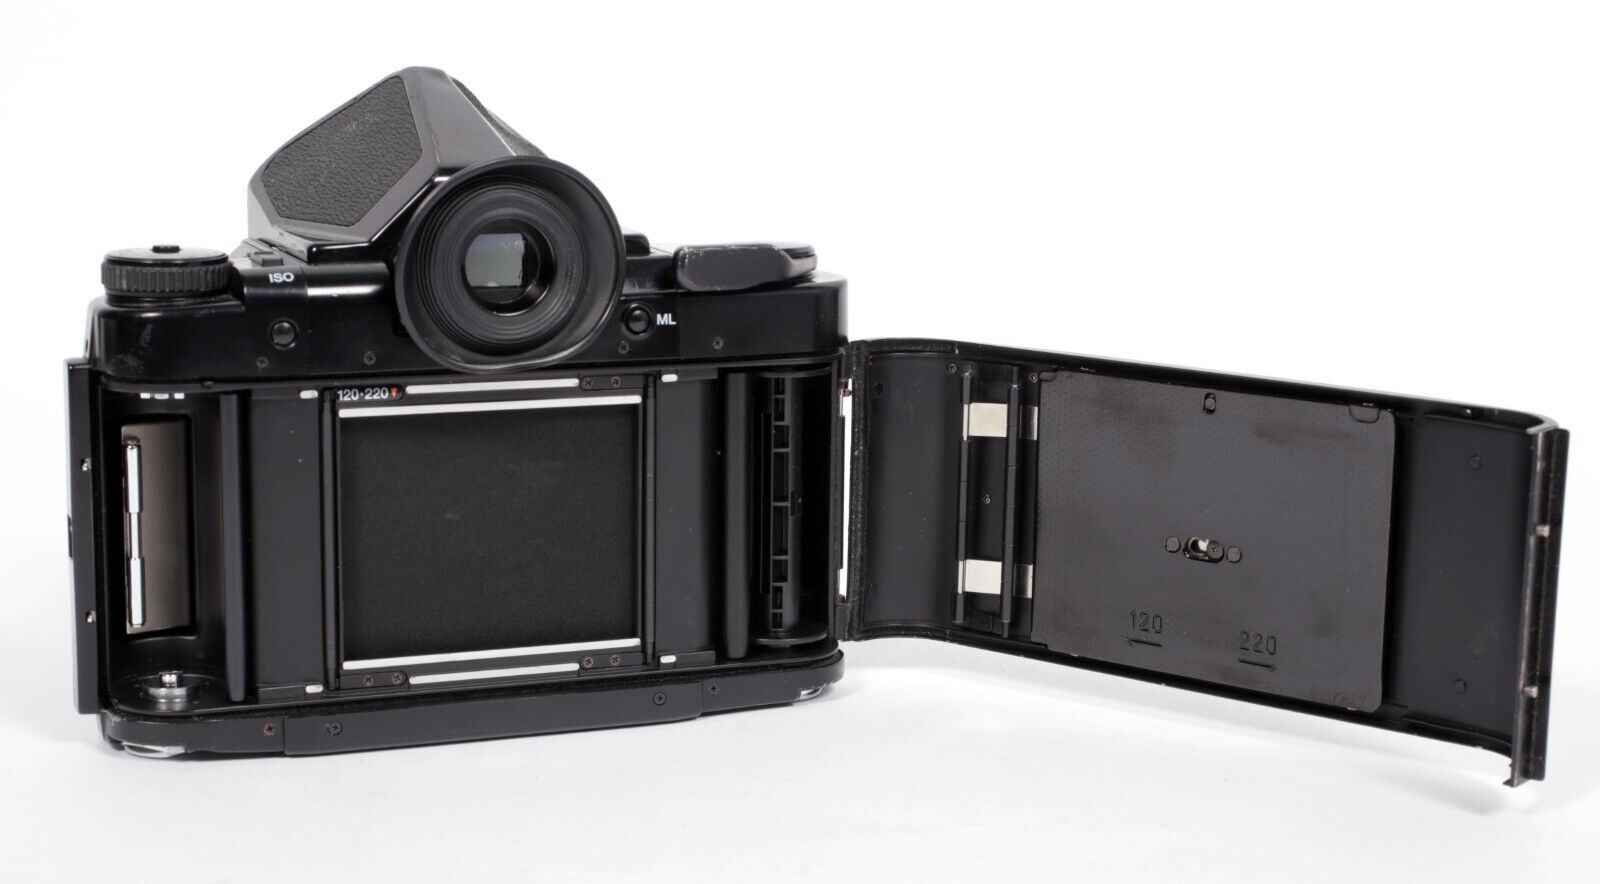 Pentax 67 II 6X7 camera with SMC 90mm F2.8 lens | CatLABS